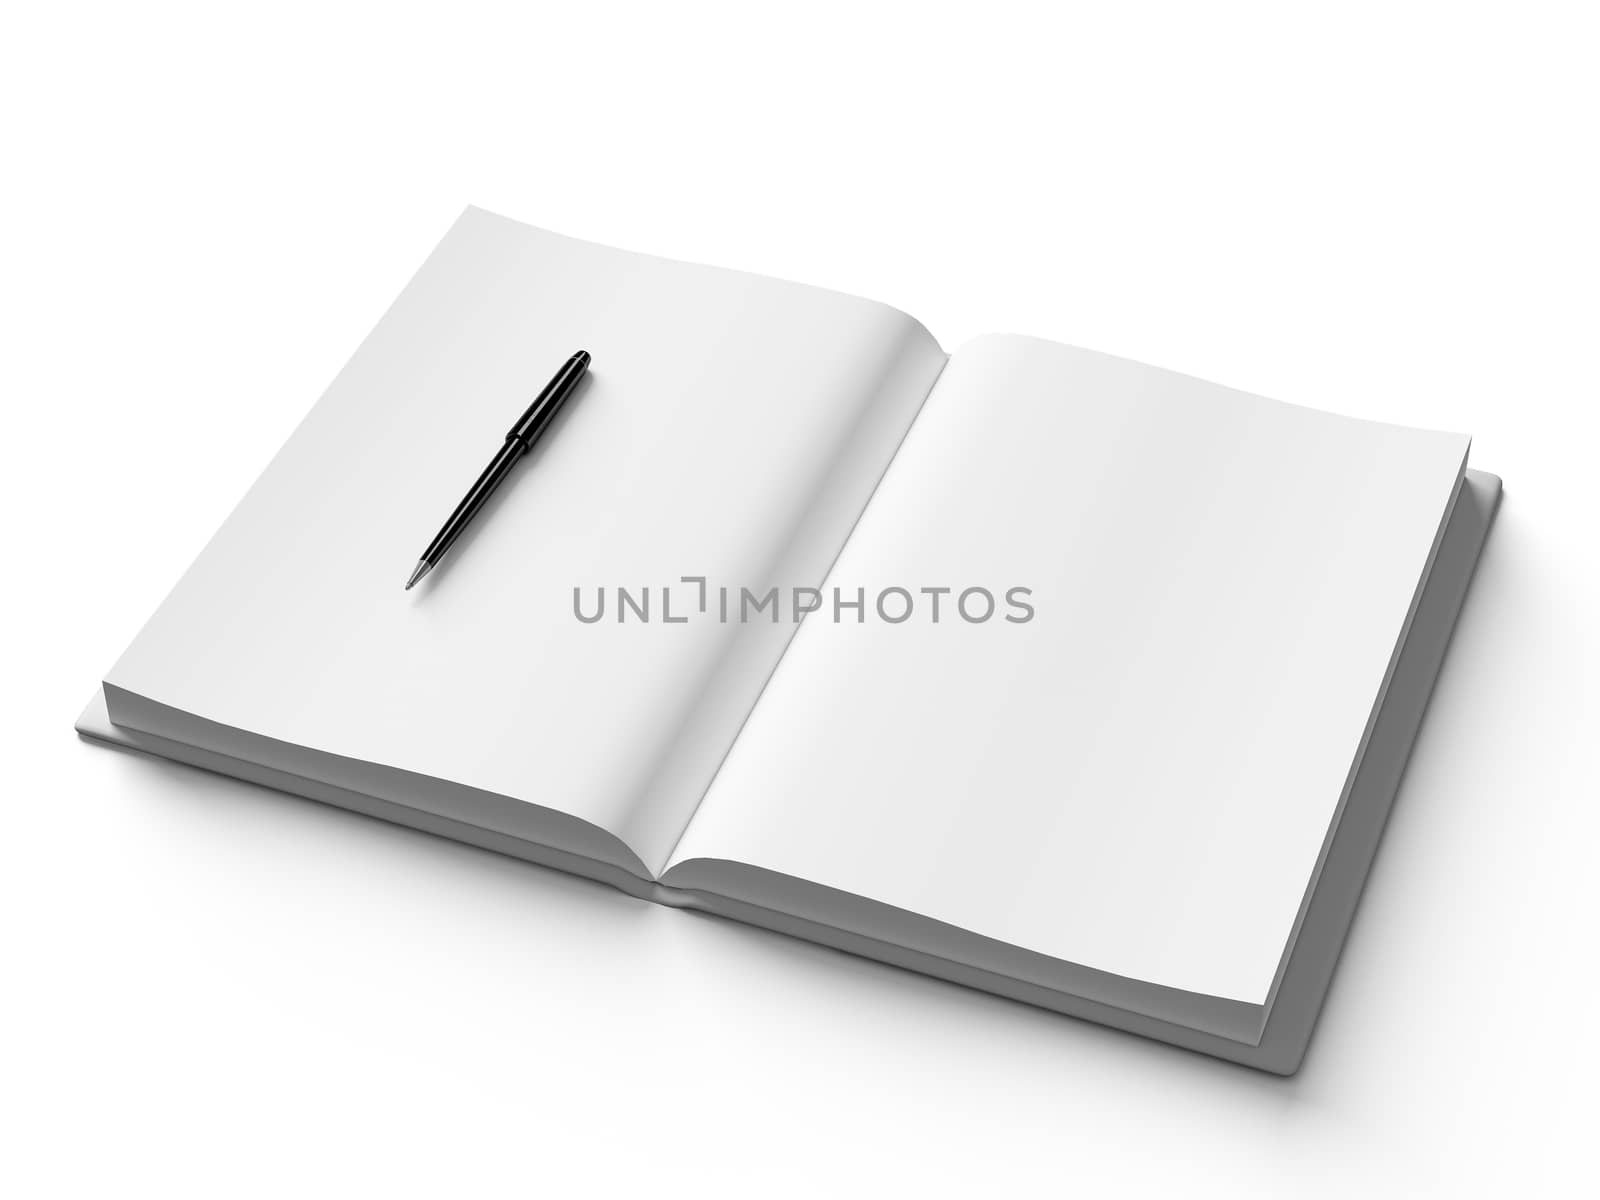 Black pen on white open book, on white background. by teerawit